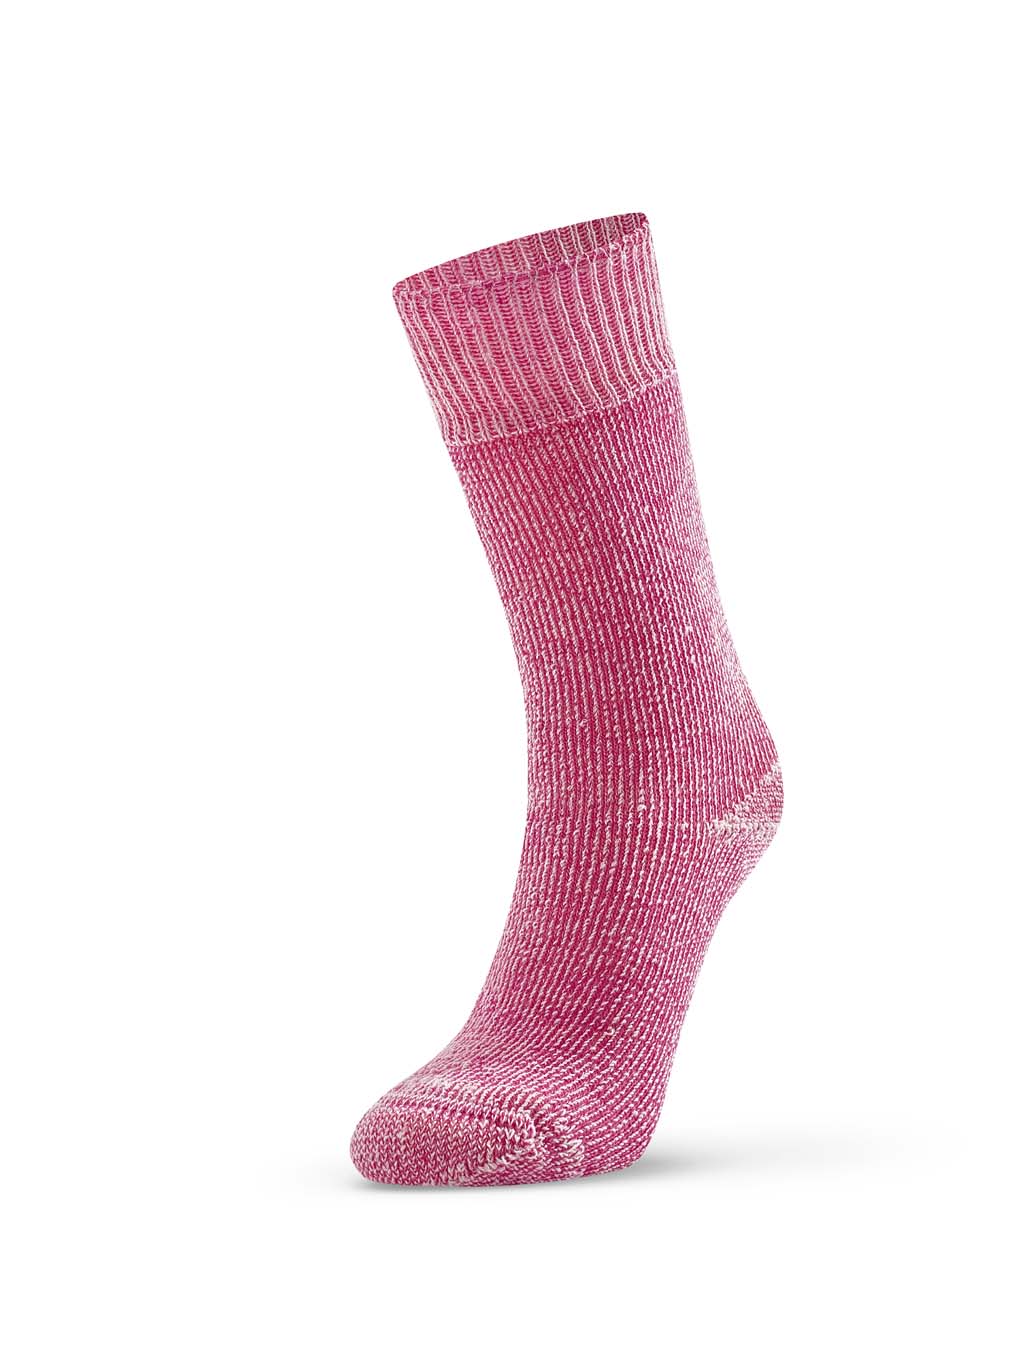 High Country Socks 3 Pack - Pink